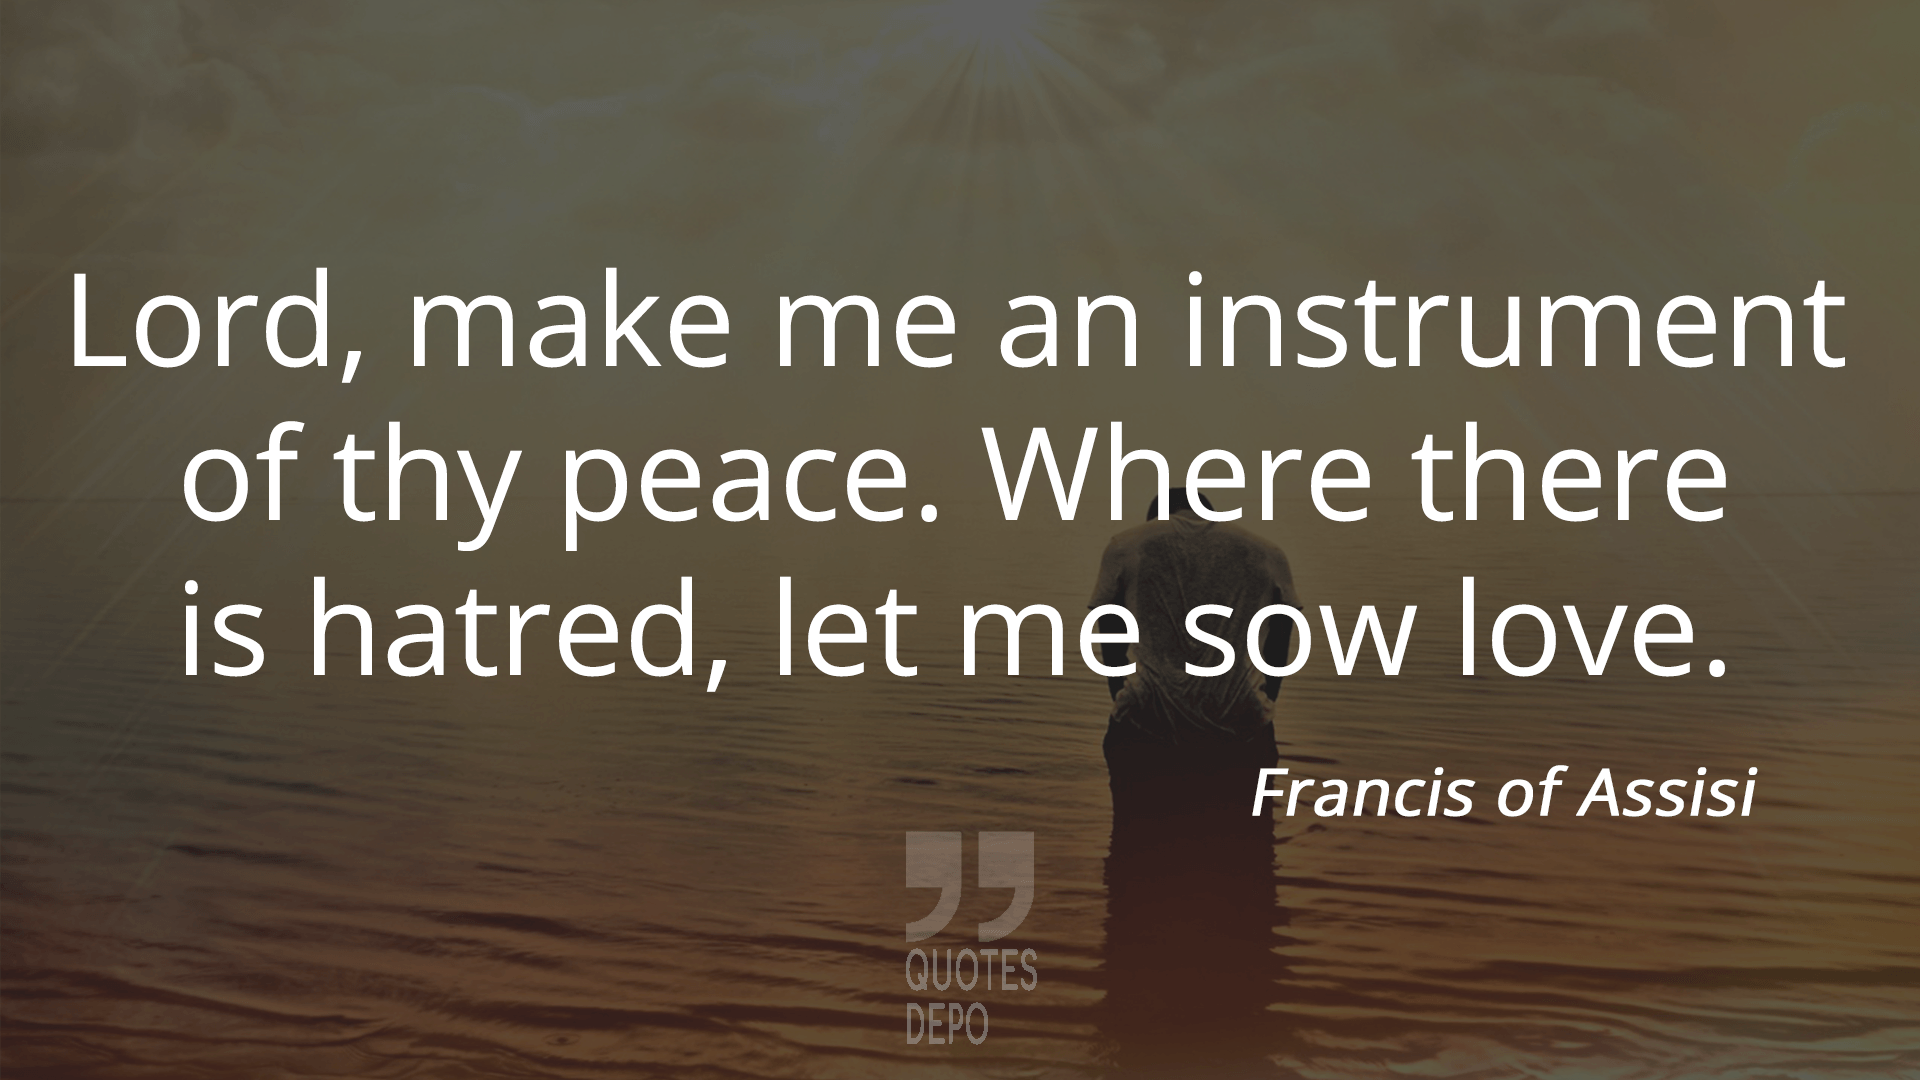 lord make me an instrument of thy peace - francis of assisi quotes